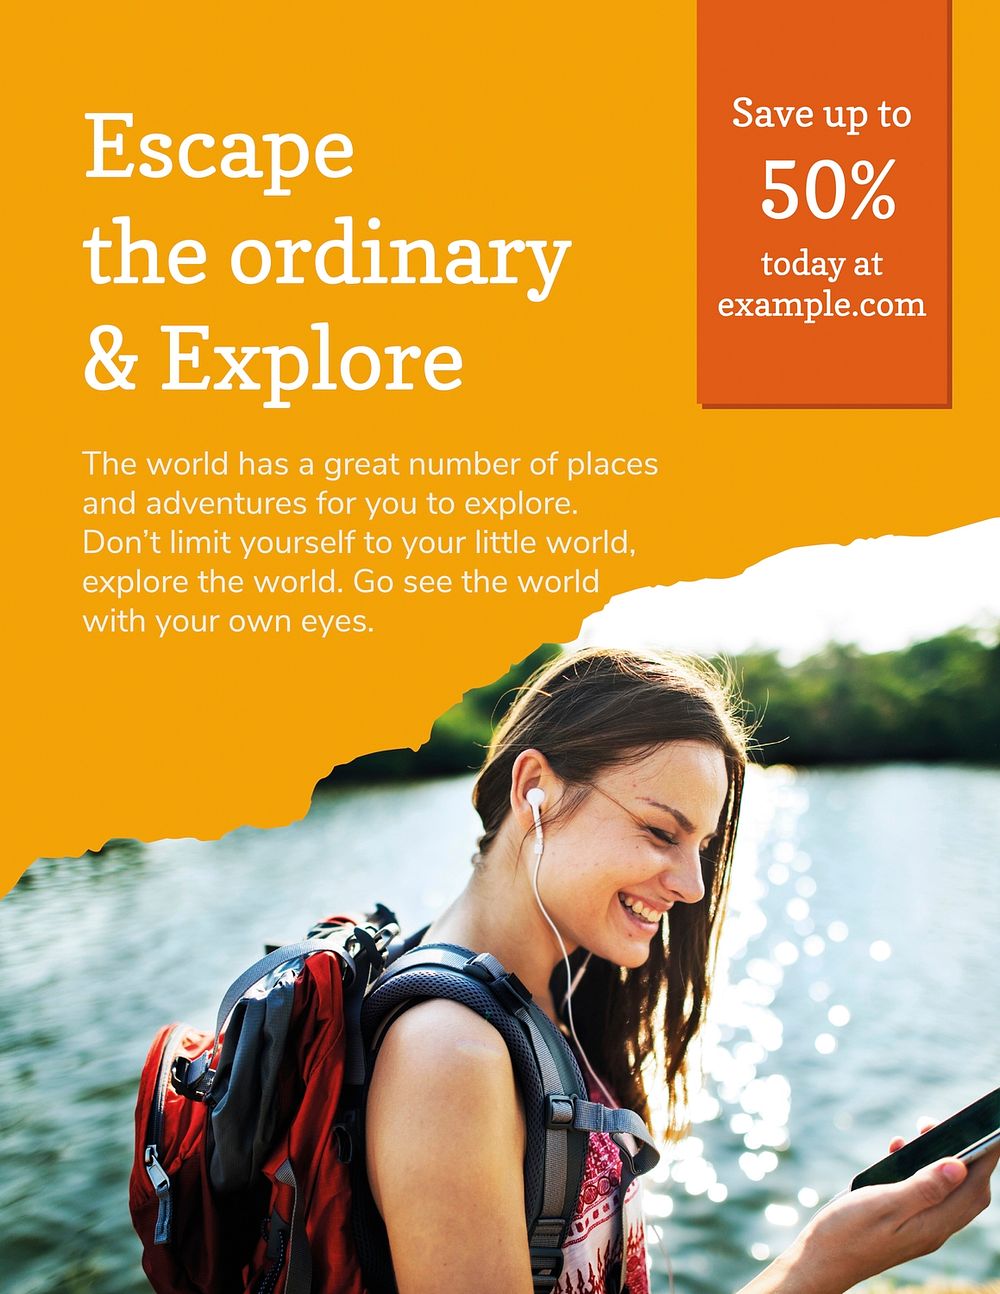 Travel agency flyer template psd with vacation photo in modern style